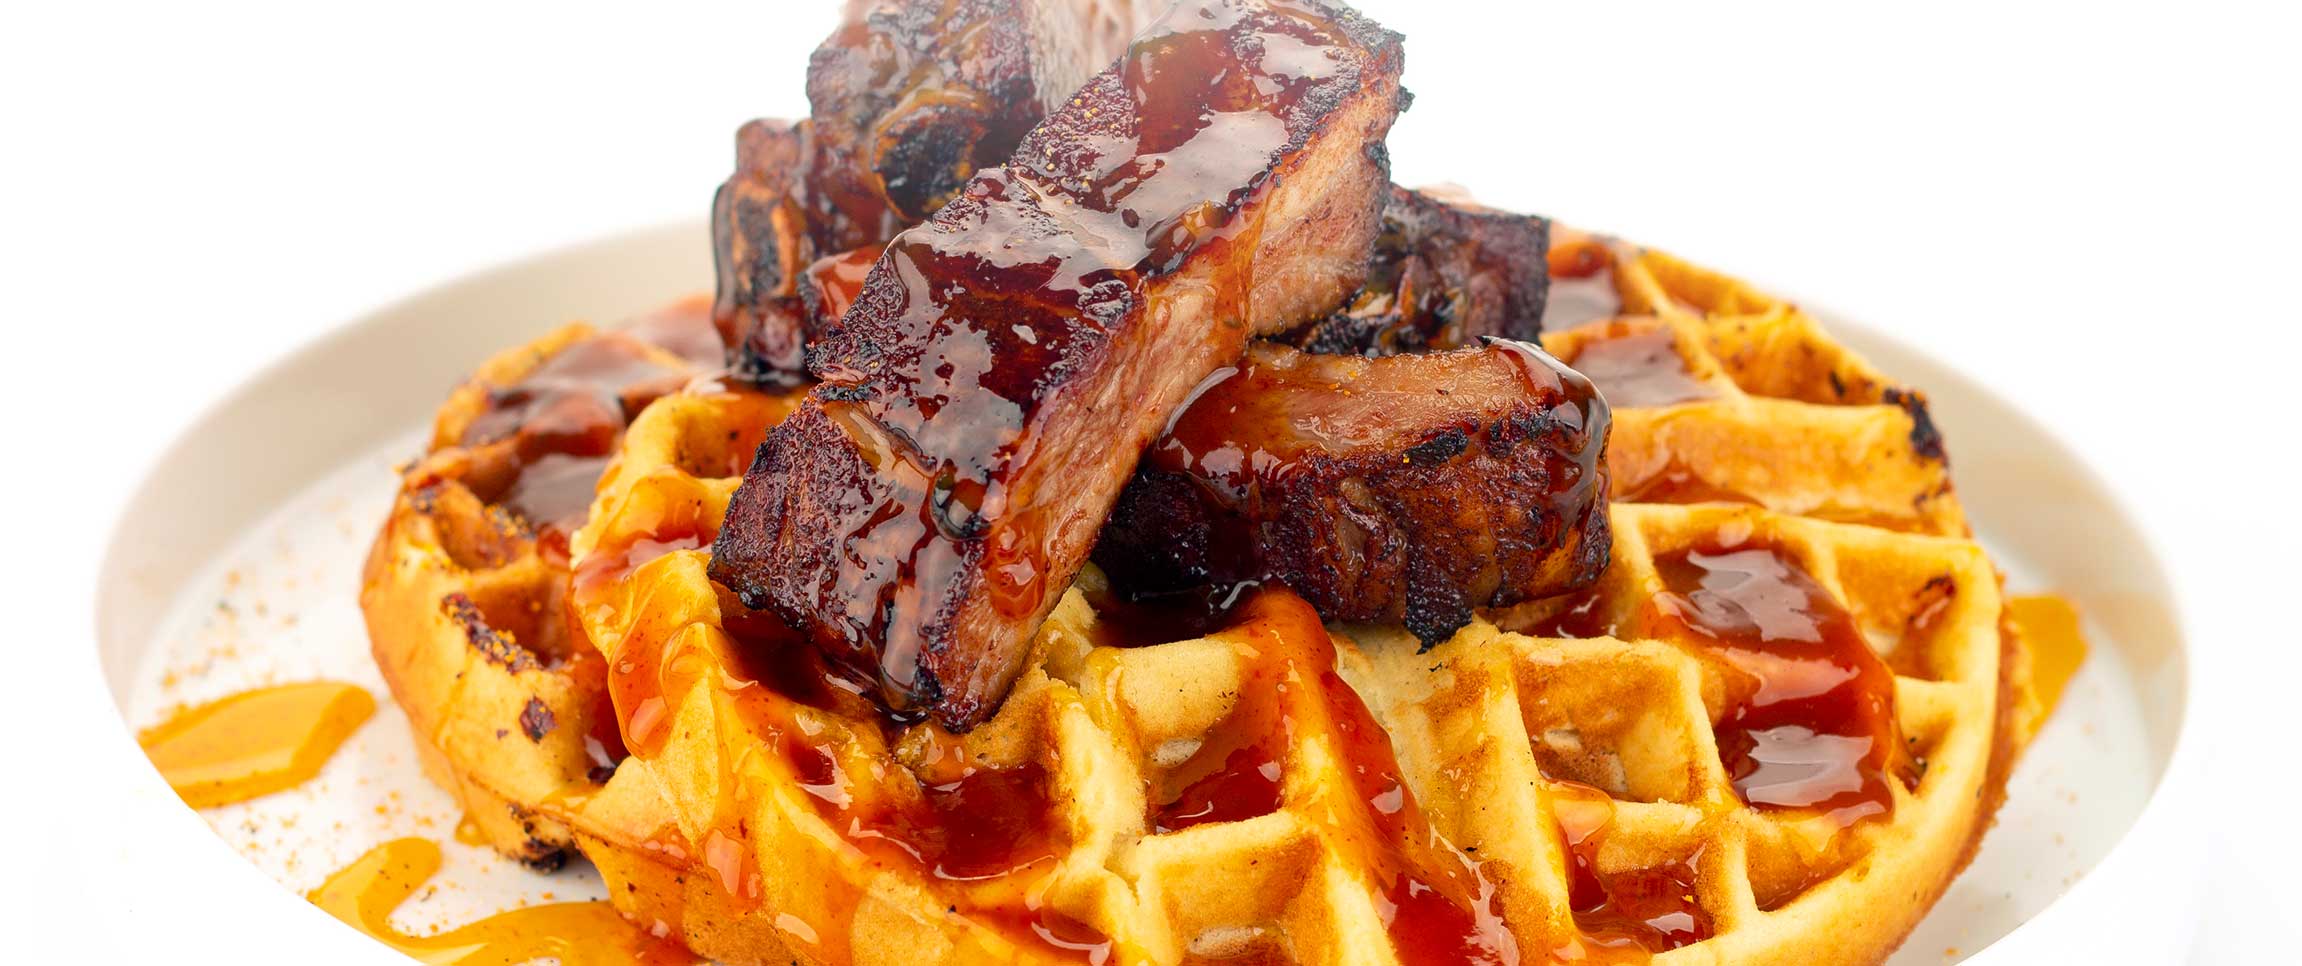 Fried Ribs and Waffles